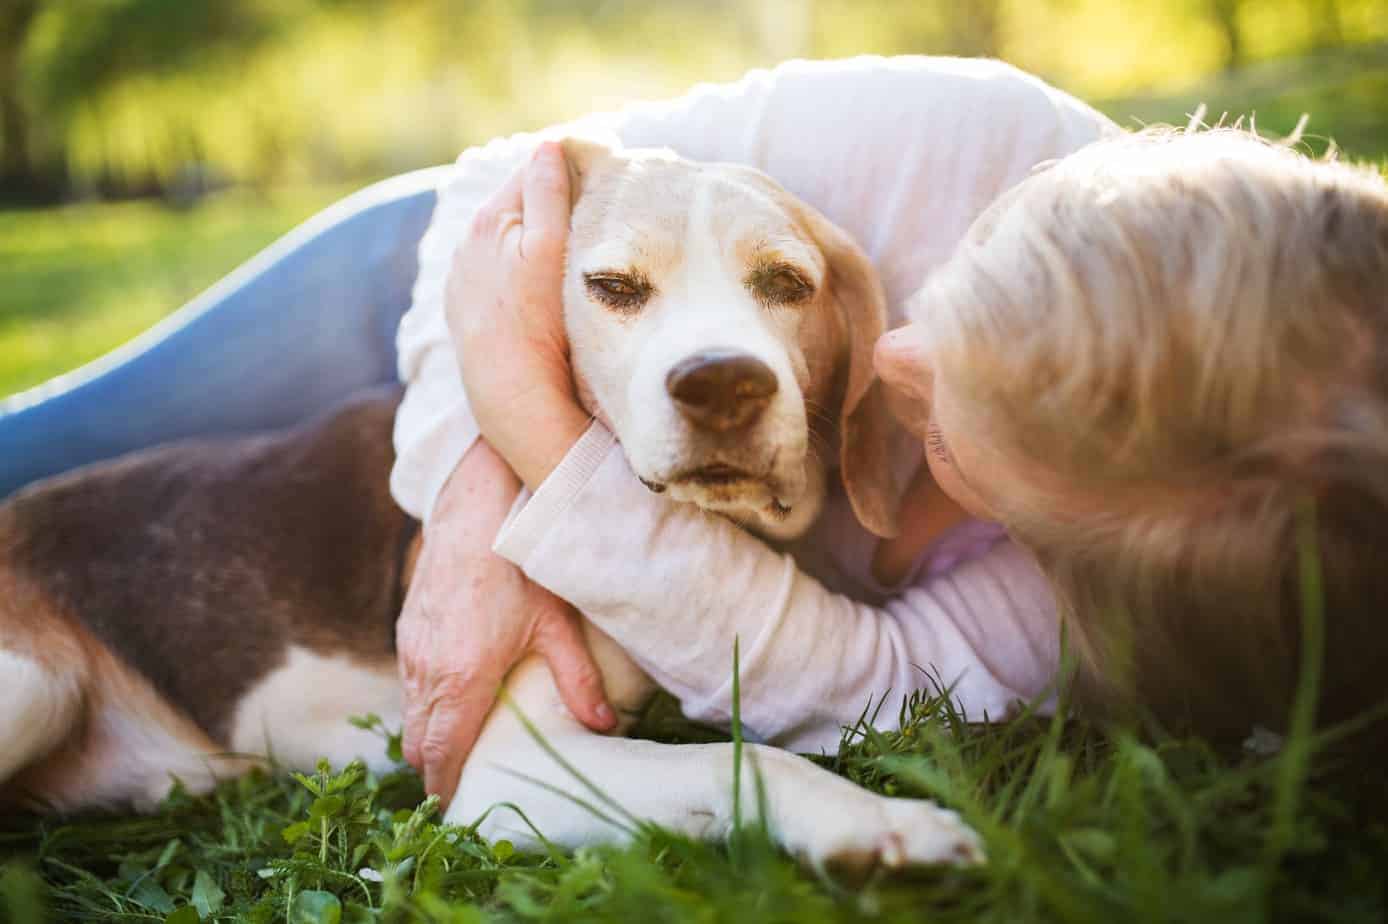 Woman cuddles her senior dog. Senior dogs require extra care.